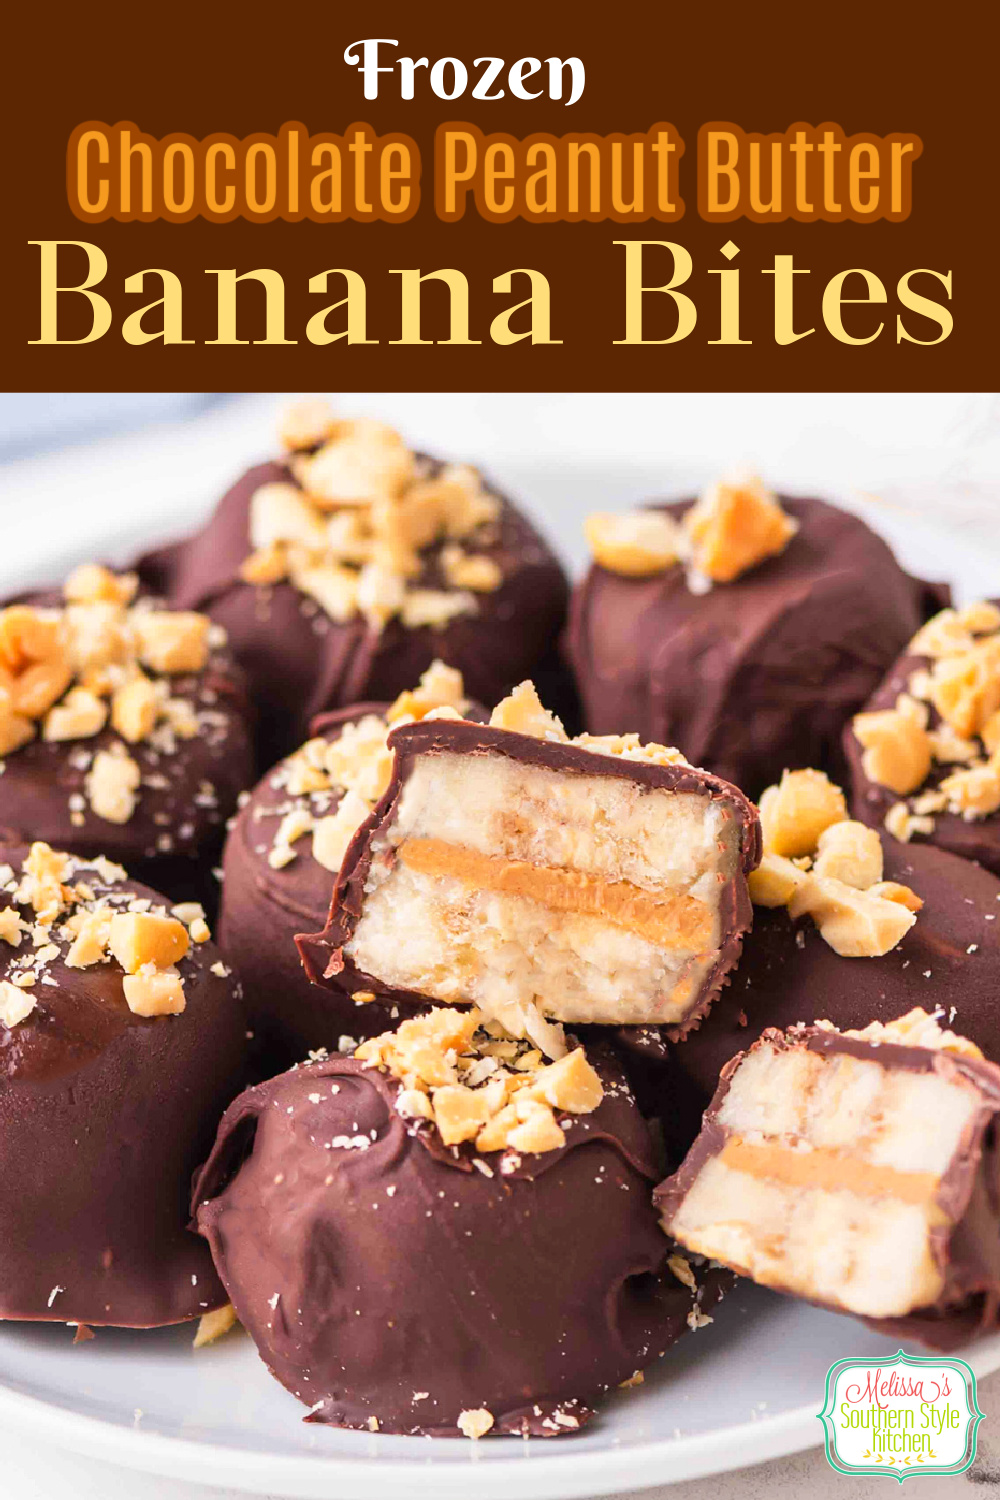 These frozen Chocolate Peanut Butter Banana Bites are perfectly portioned for a two bite way to satisfy your sweets craving #bananas #bananabites #chocolatebananas #frozendesserts #frozenbananas #peanutbutter #peanutbutterbananas #sweets #easydessertrecipes via @melissasssk